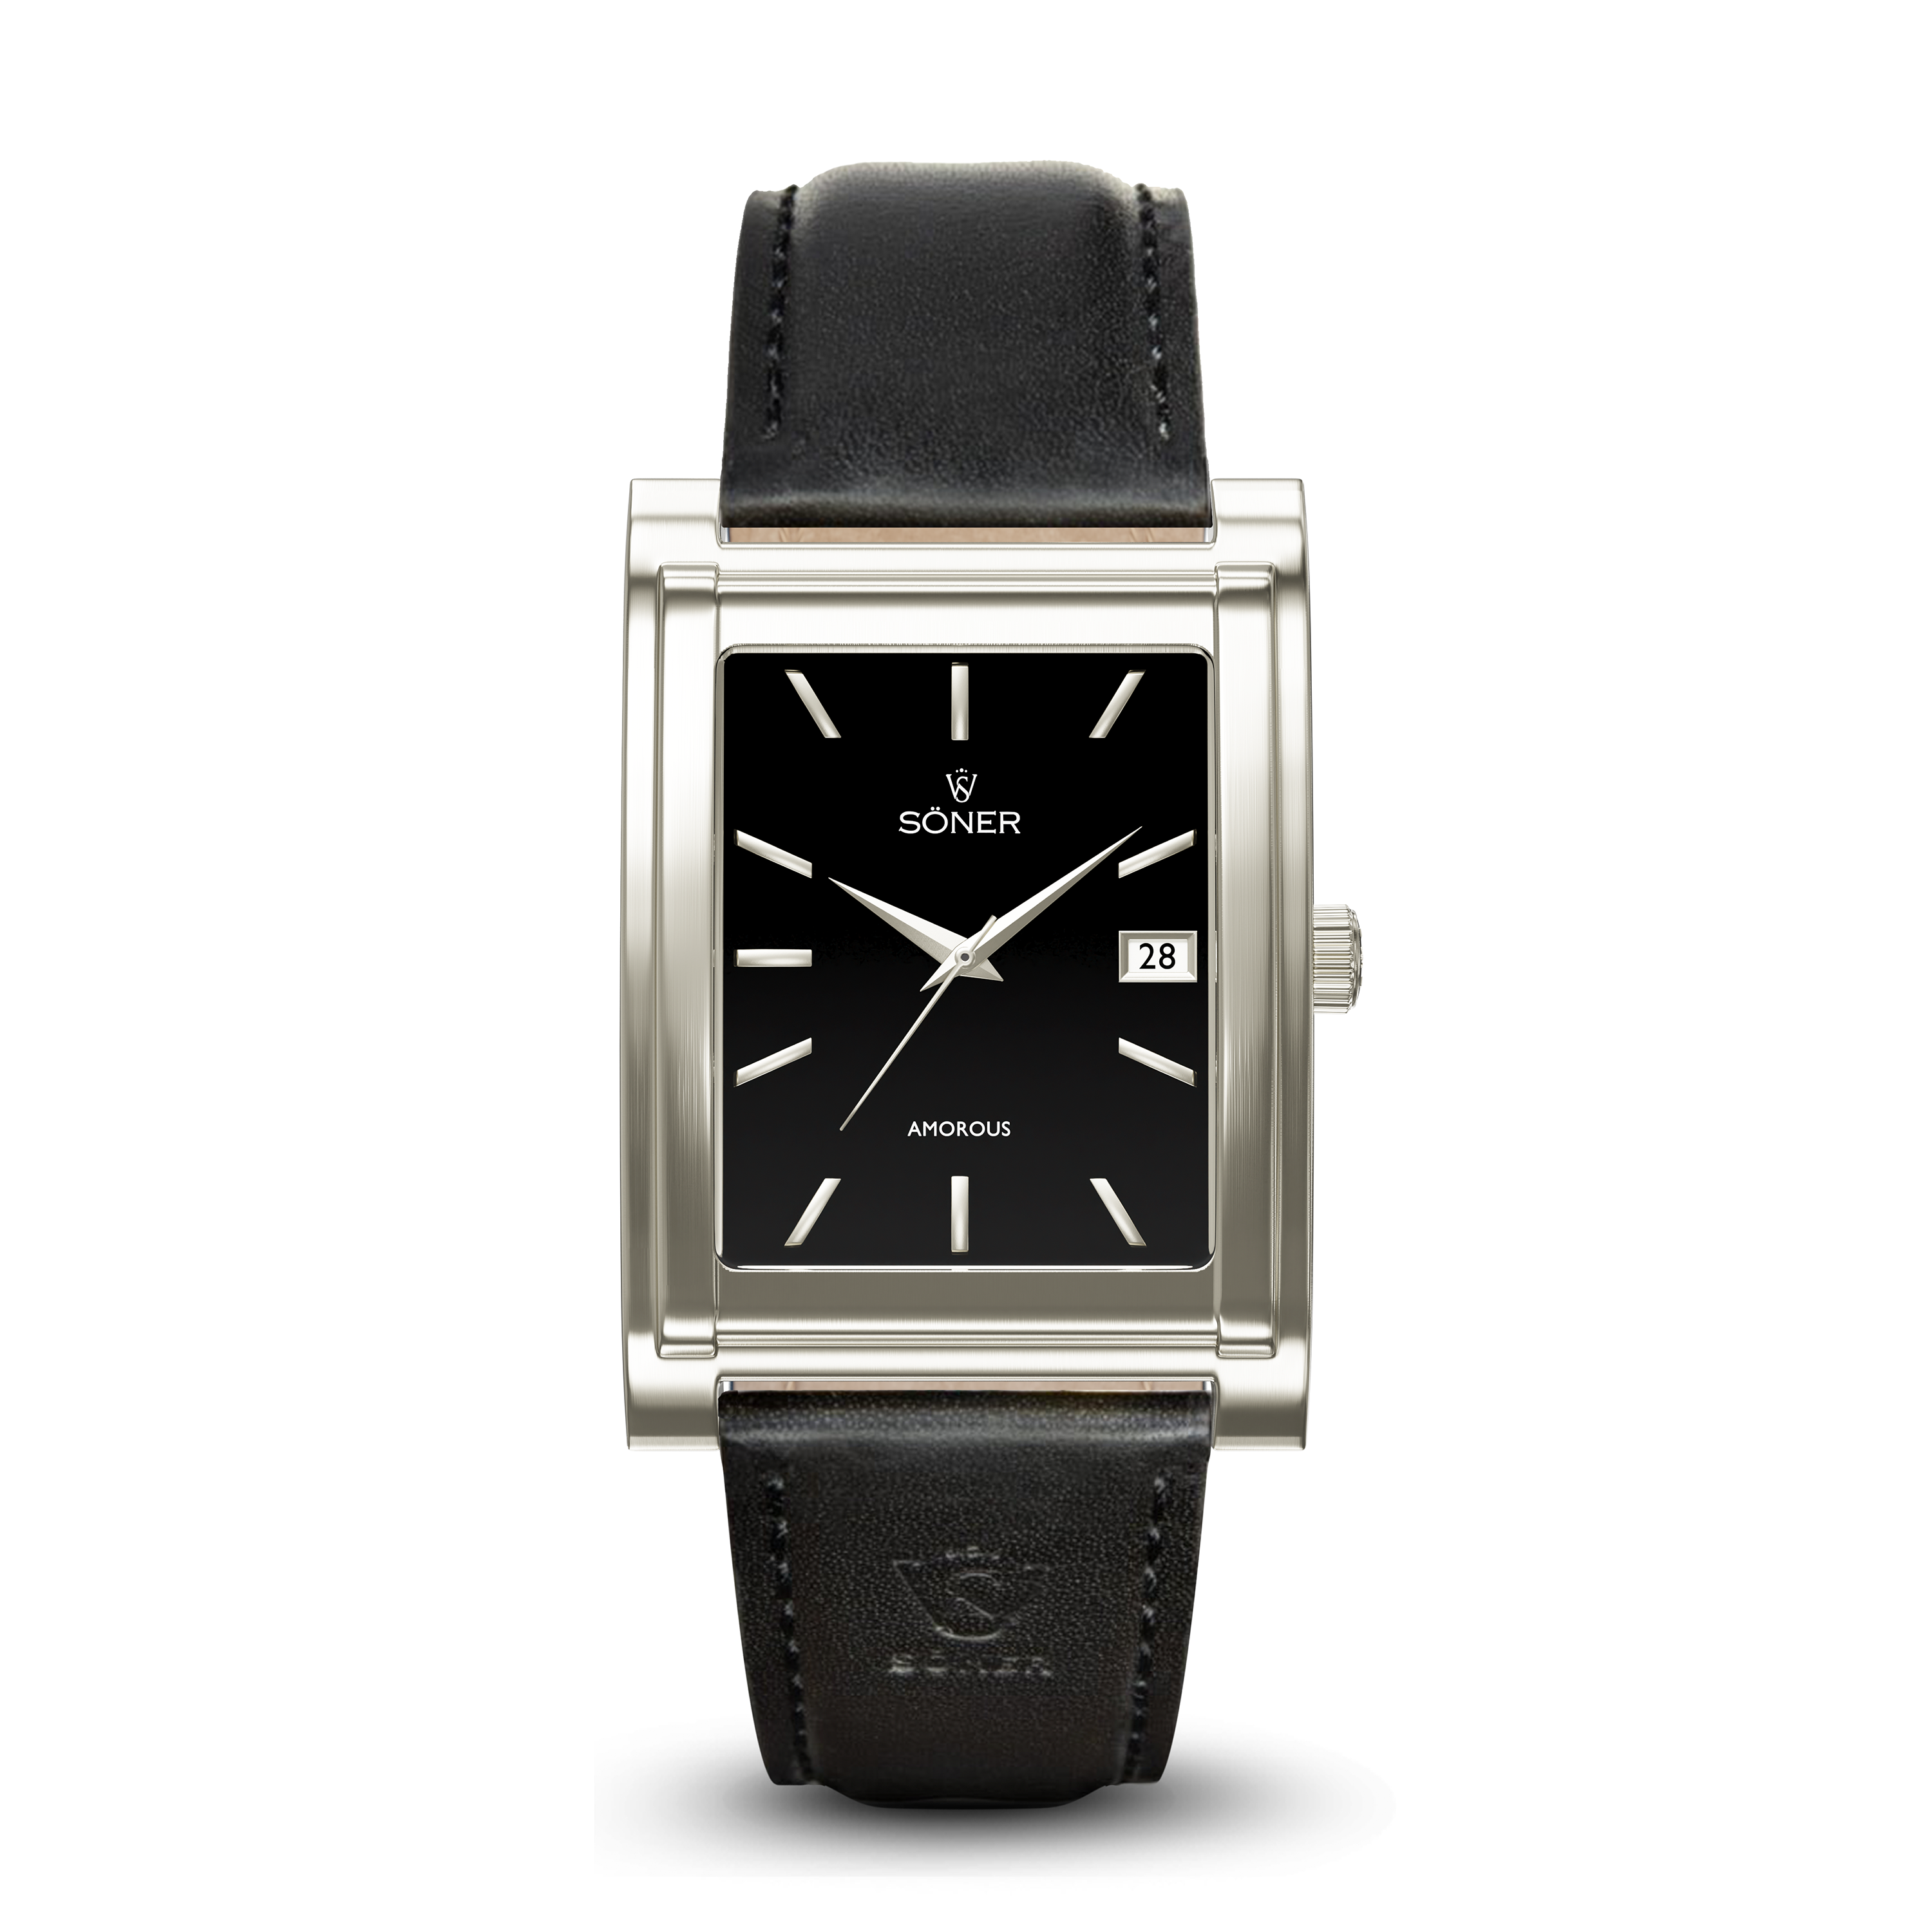 Square automatic watch, Amorous Sydney with black dial - black leather strap front view